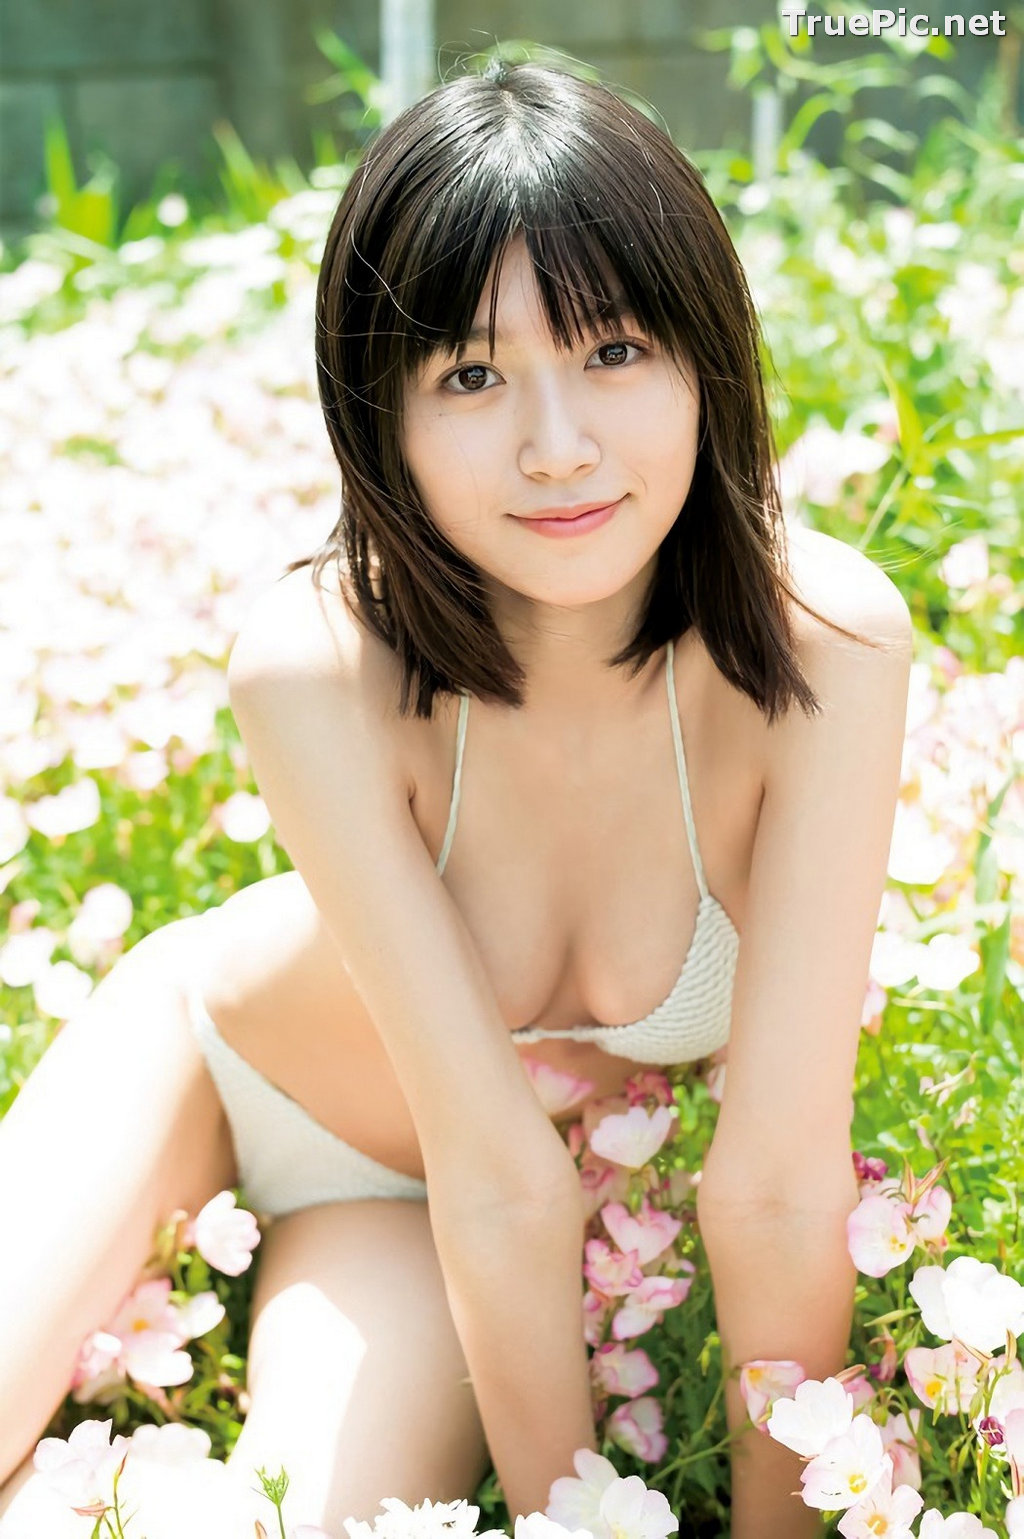 ImageJapanese Gravure Idol and Actress - Kitamuki Miyu (北向珠夕) - Sexy Picture Collection 2020 - TruePic.net - Picture-31